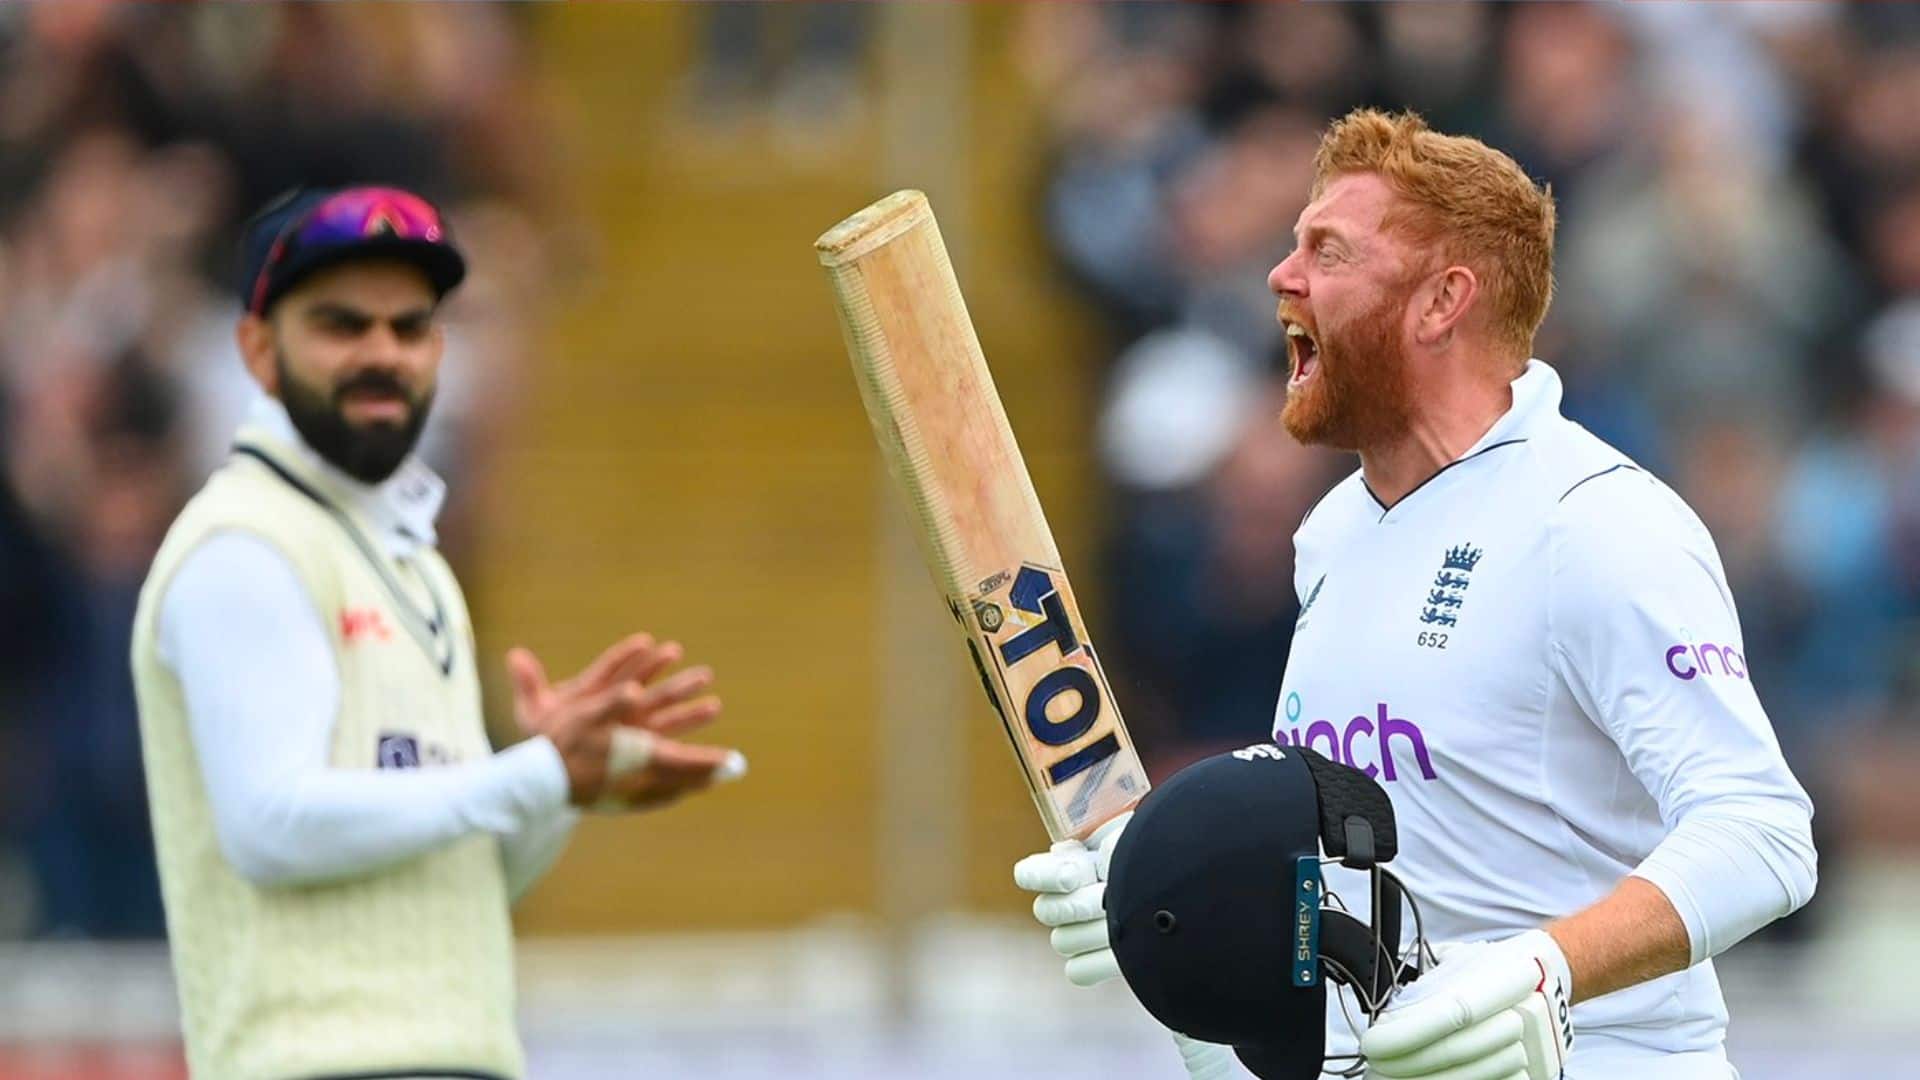  [Watch] When Virat Kohli’s Ugly Sledging Lifted 'Sleeping Beast' Bairstow Against India